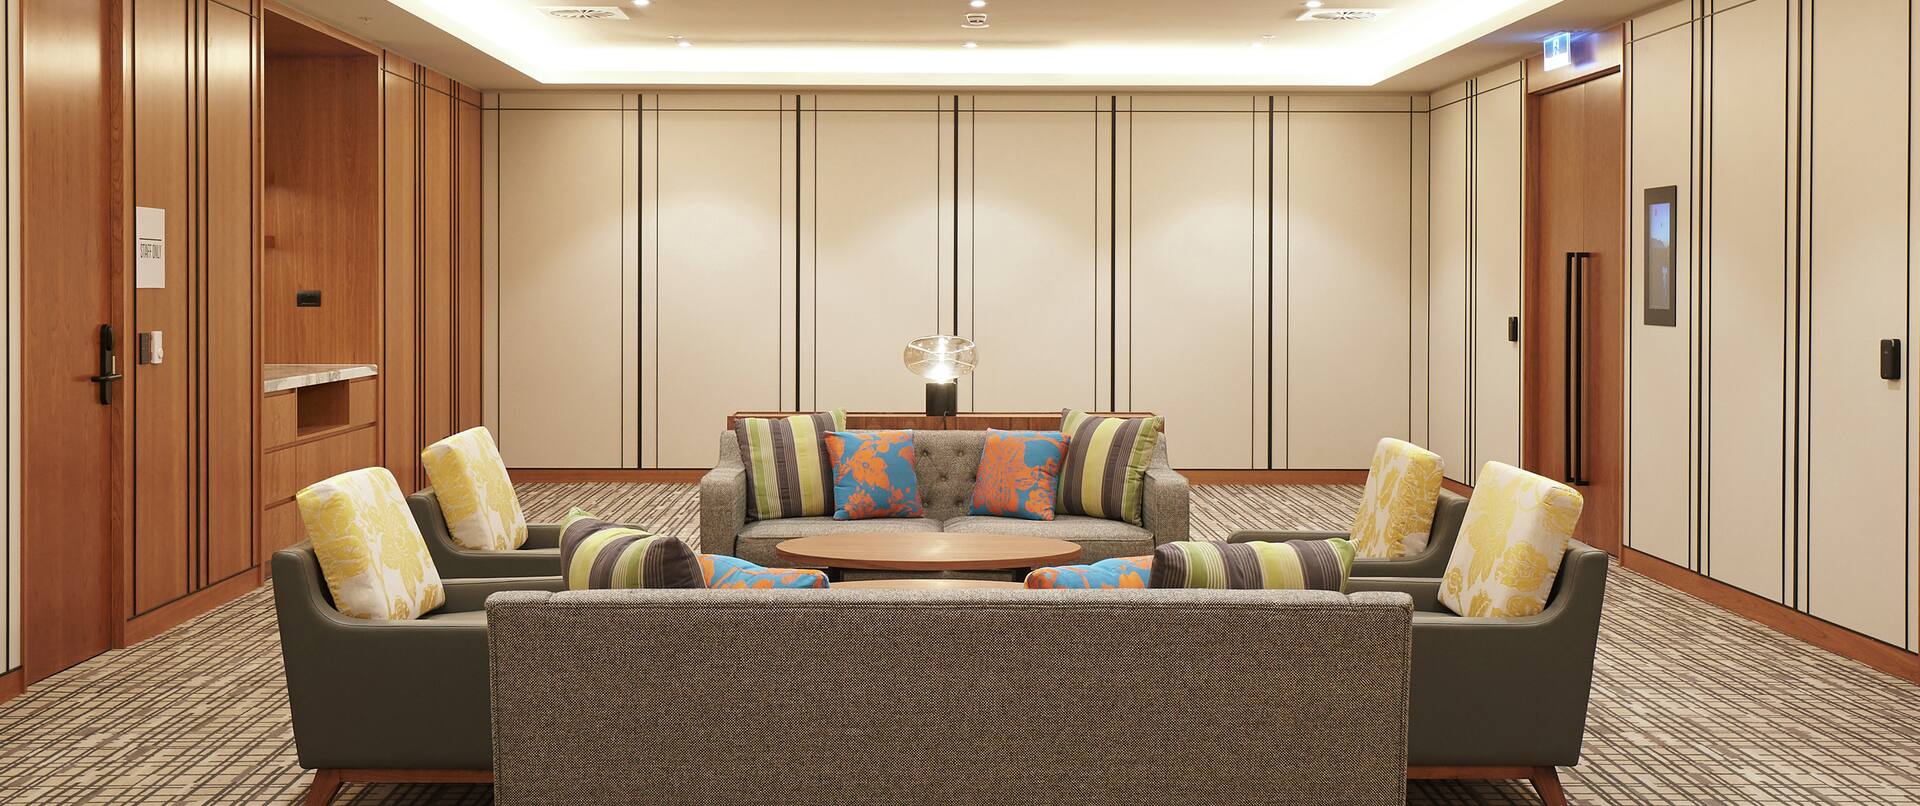 Meeting Room with Couches, Chairs, and a Round Table